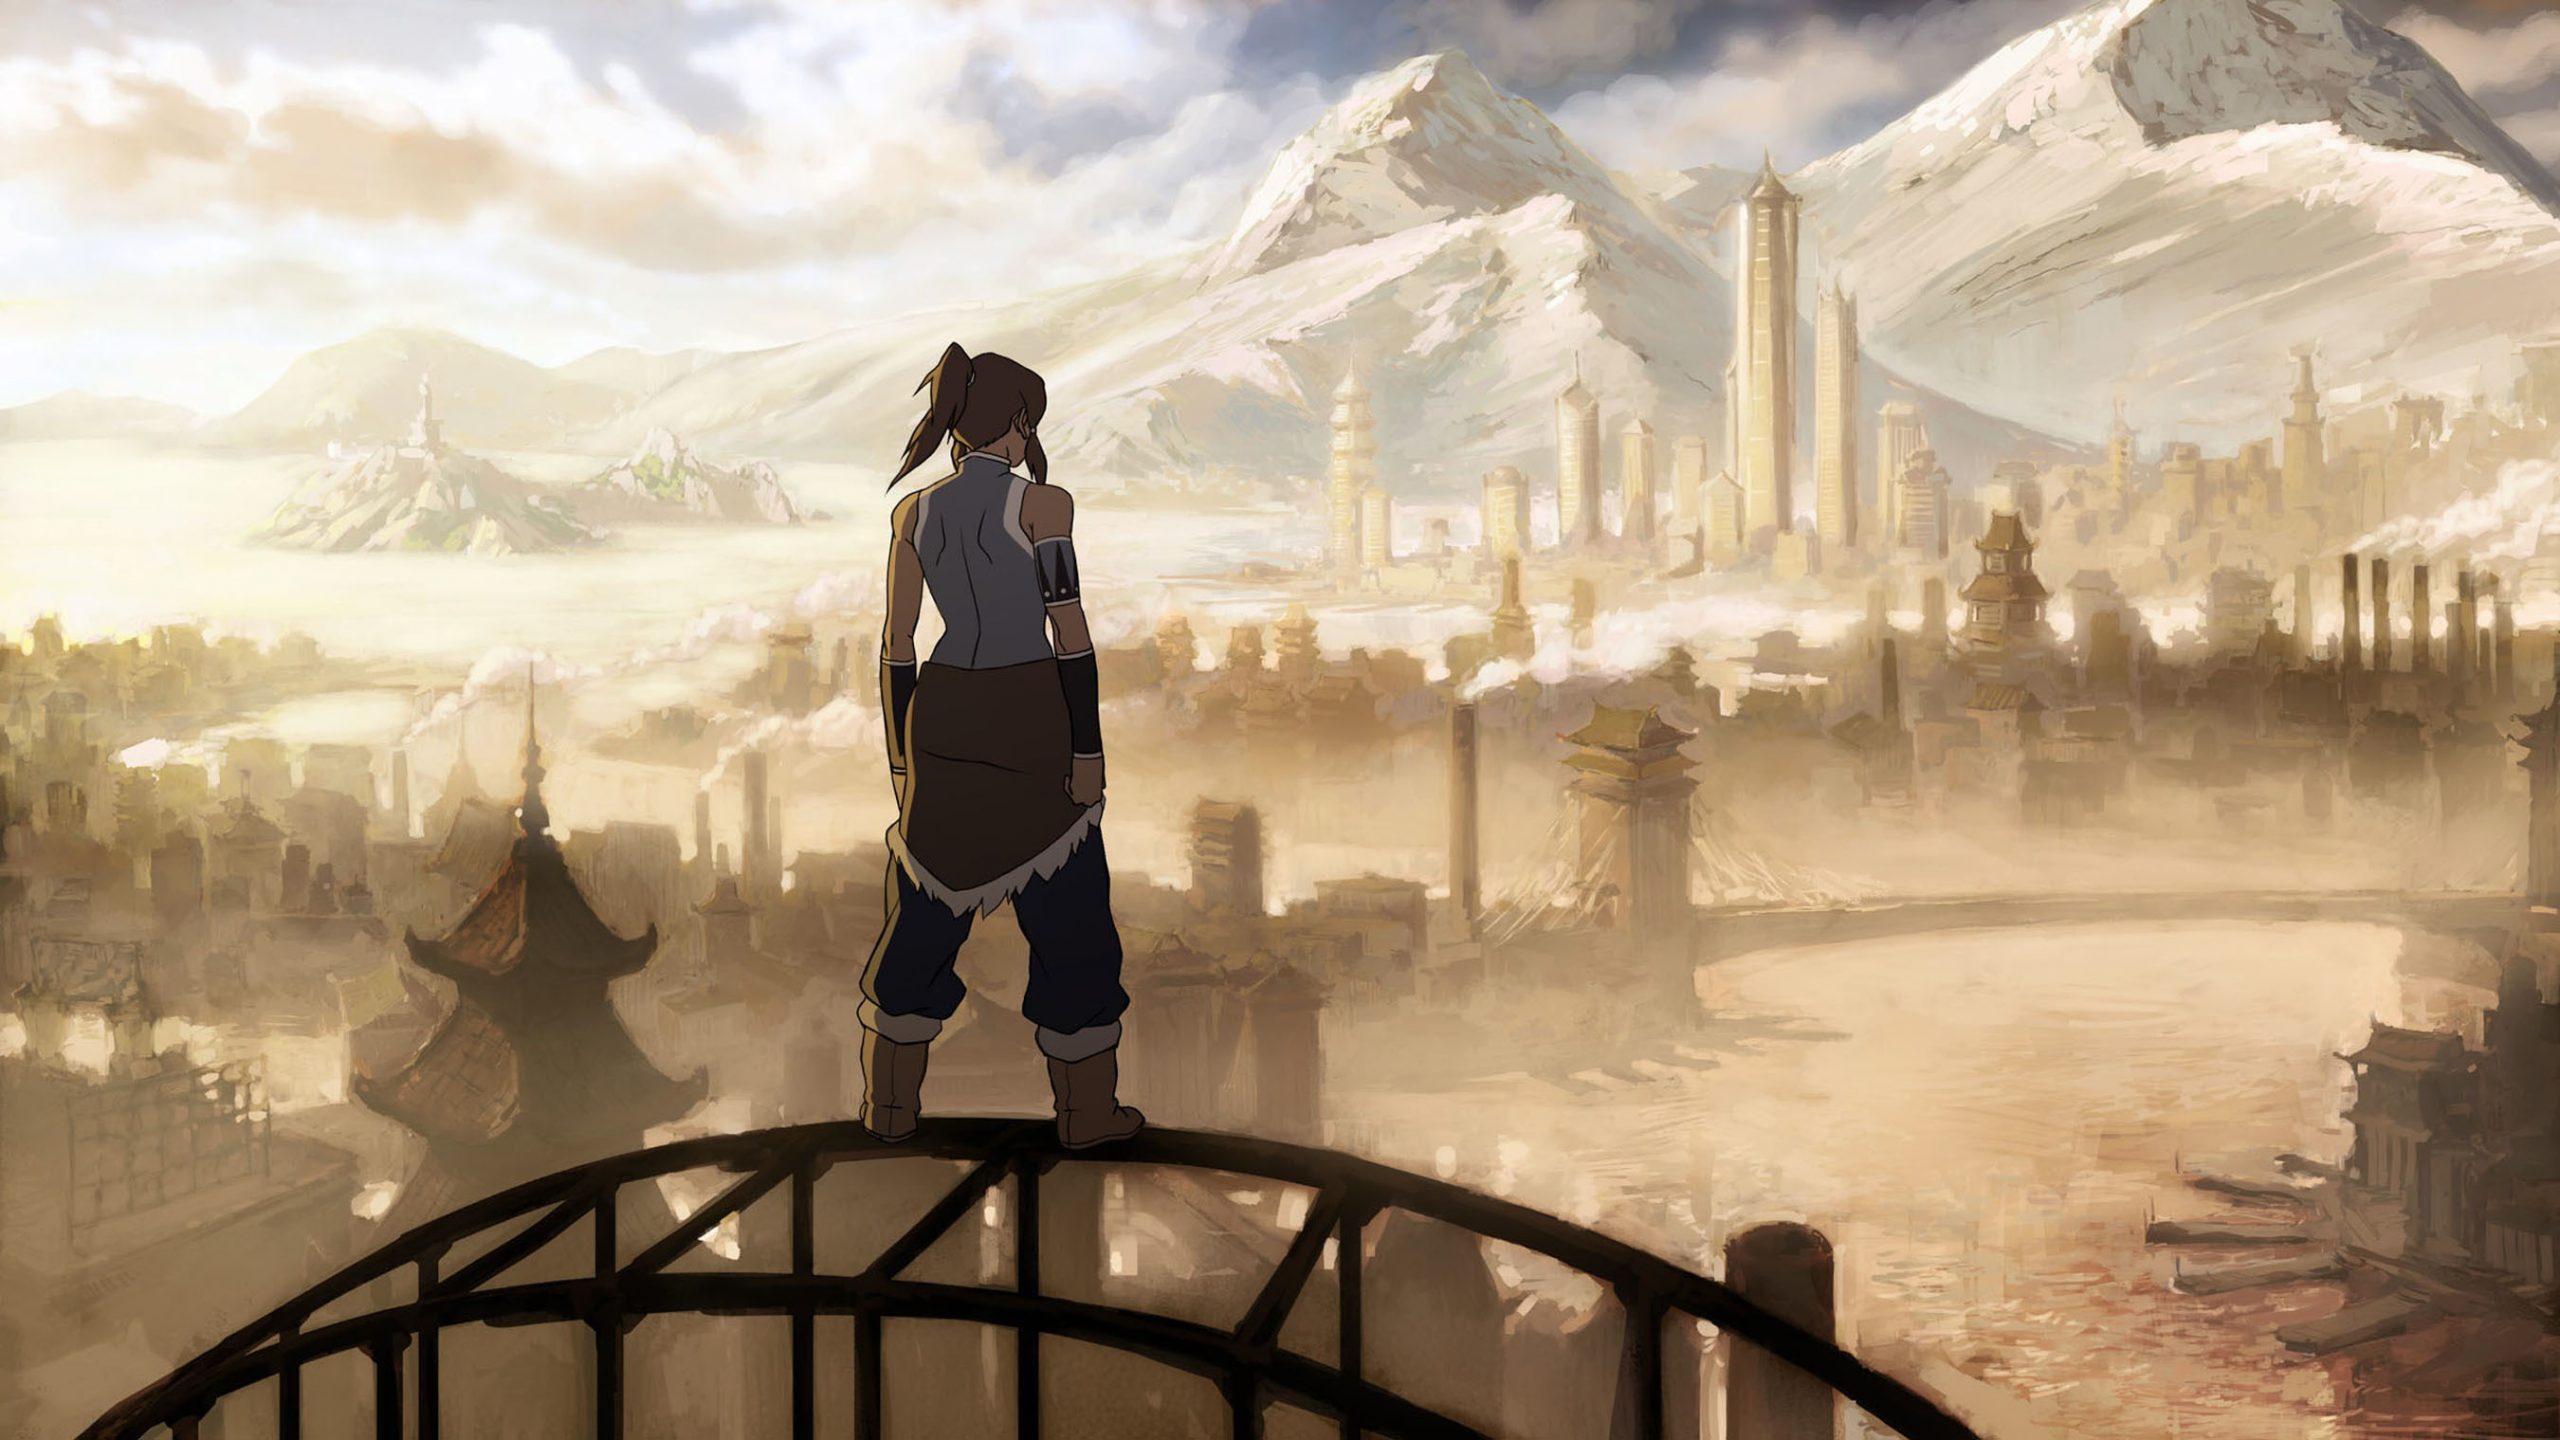 Every Episode of The Legend of Korra is Free to Watch Online for the Next Two Weeks